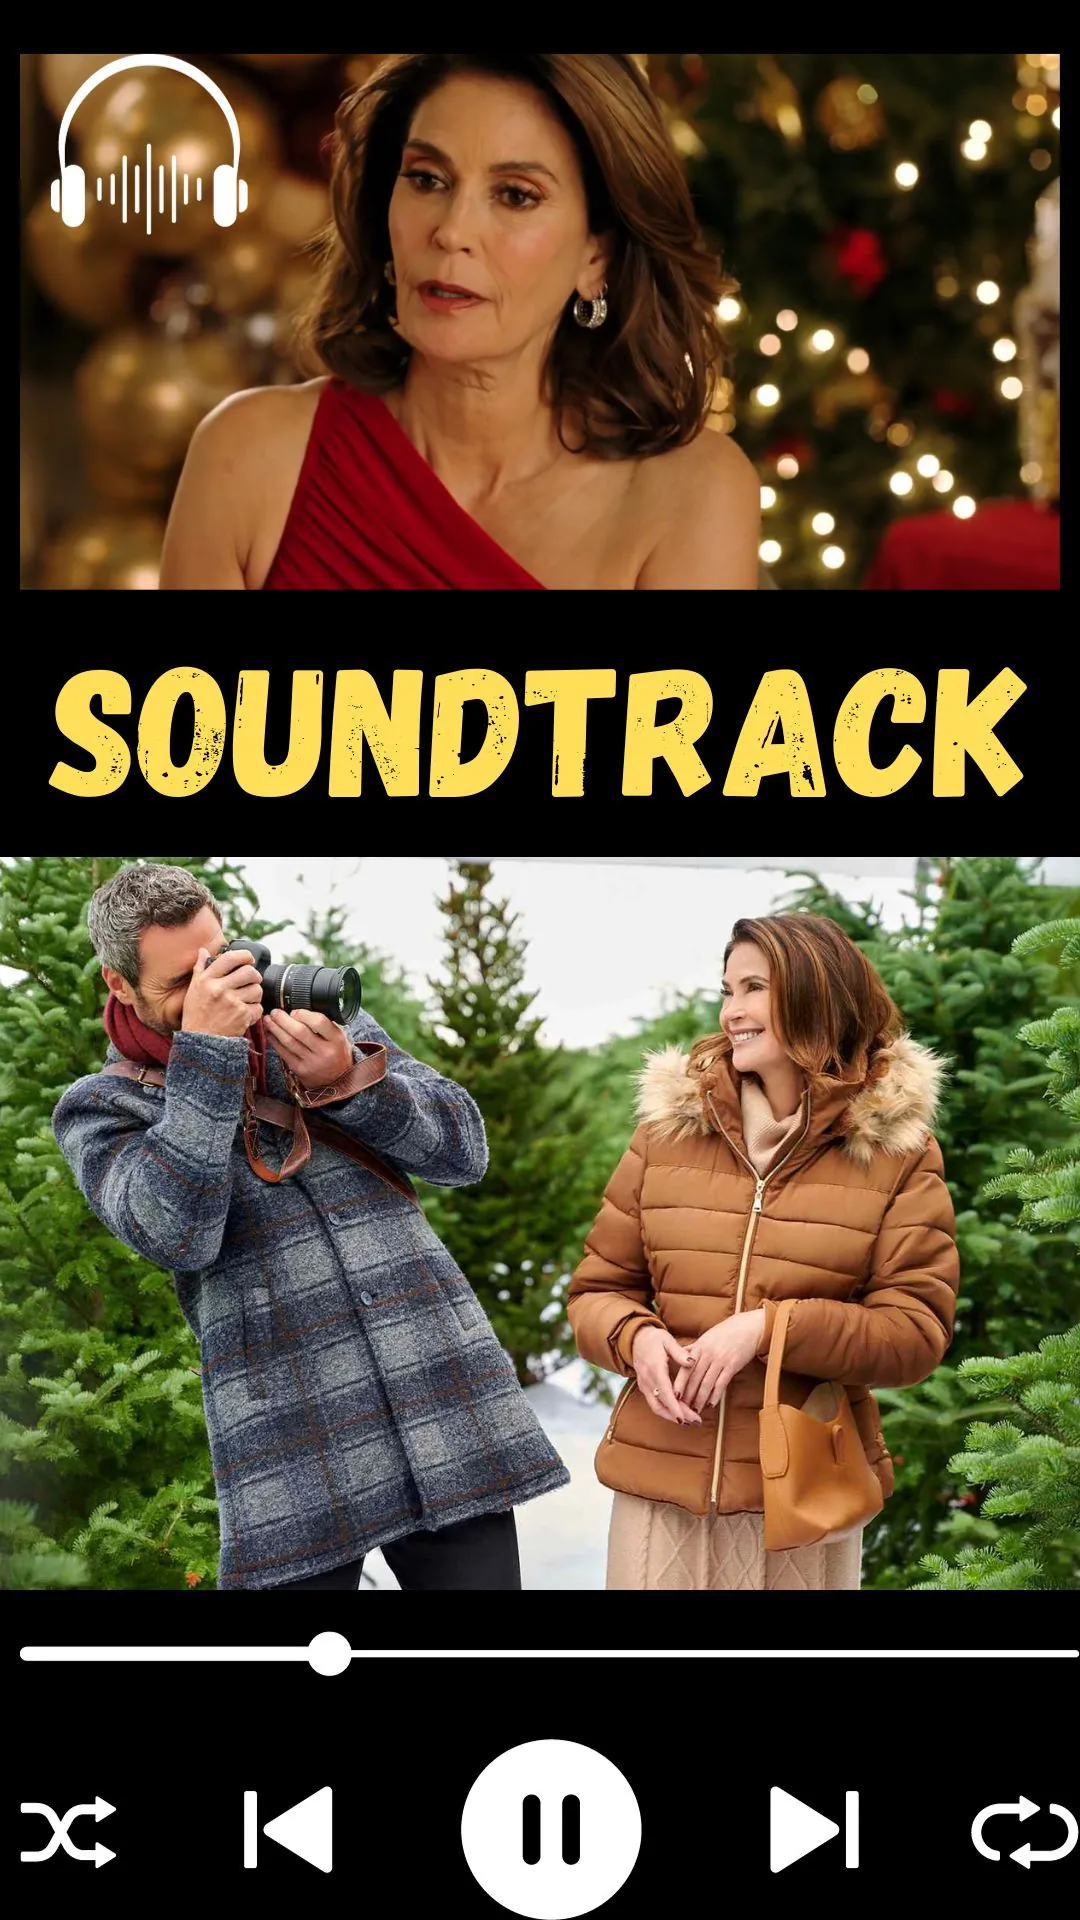 How To Fall In Love by Christmas Soundtrack